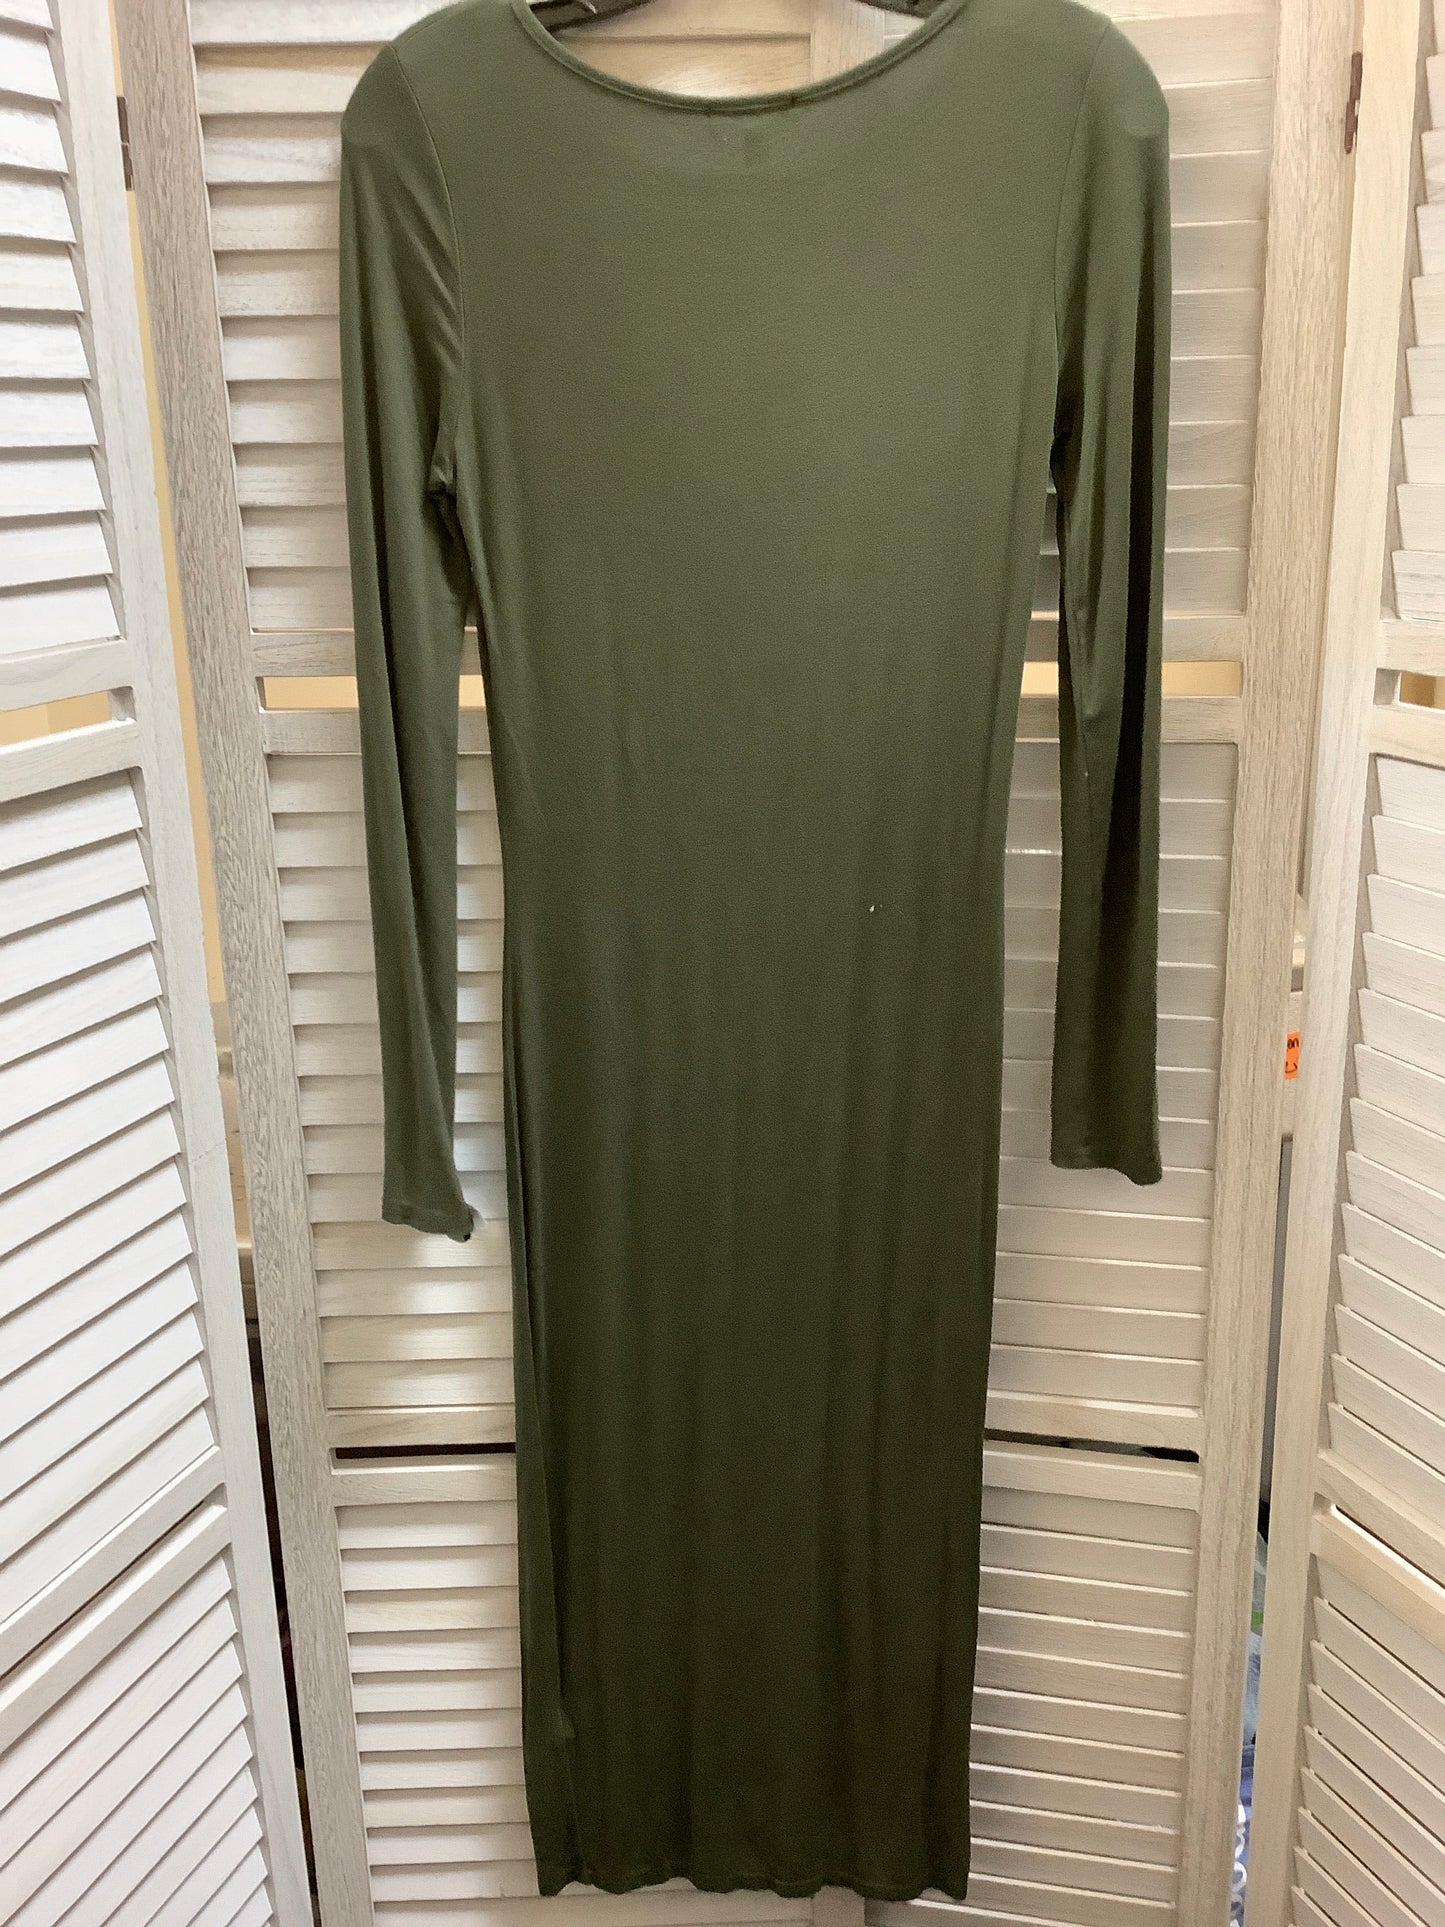 Dress Casual Maxi By Topshop  Size: 6